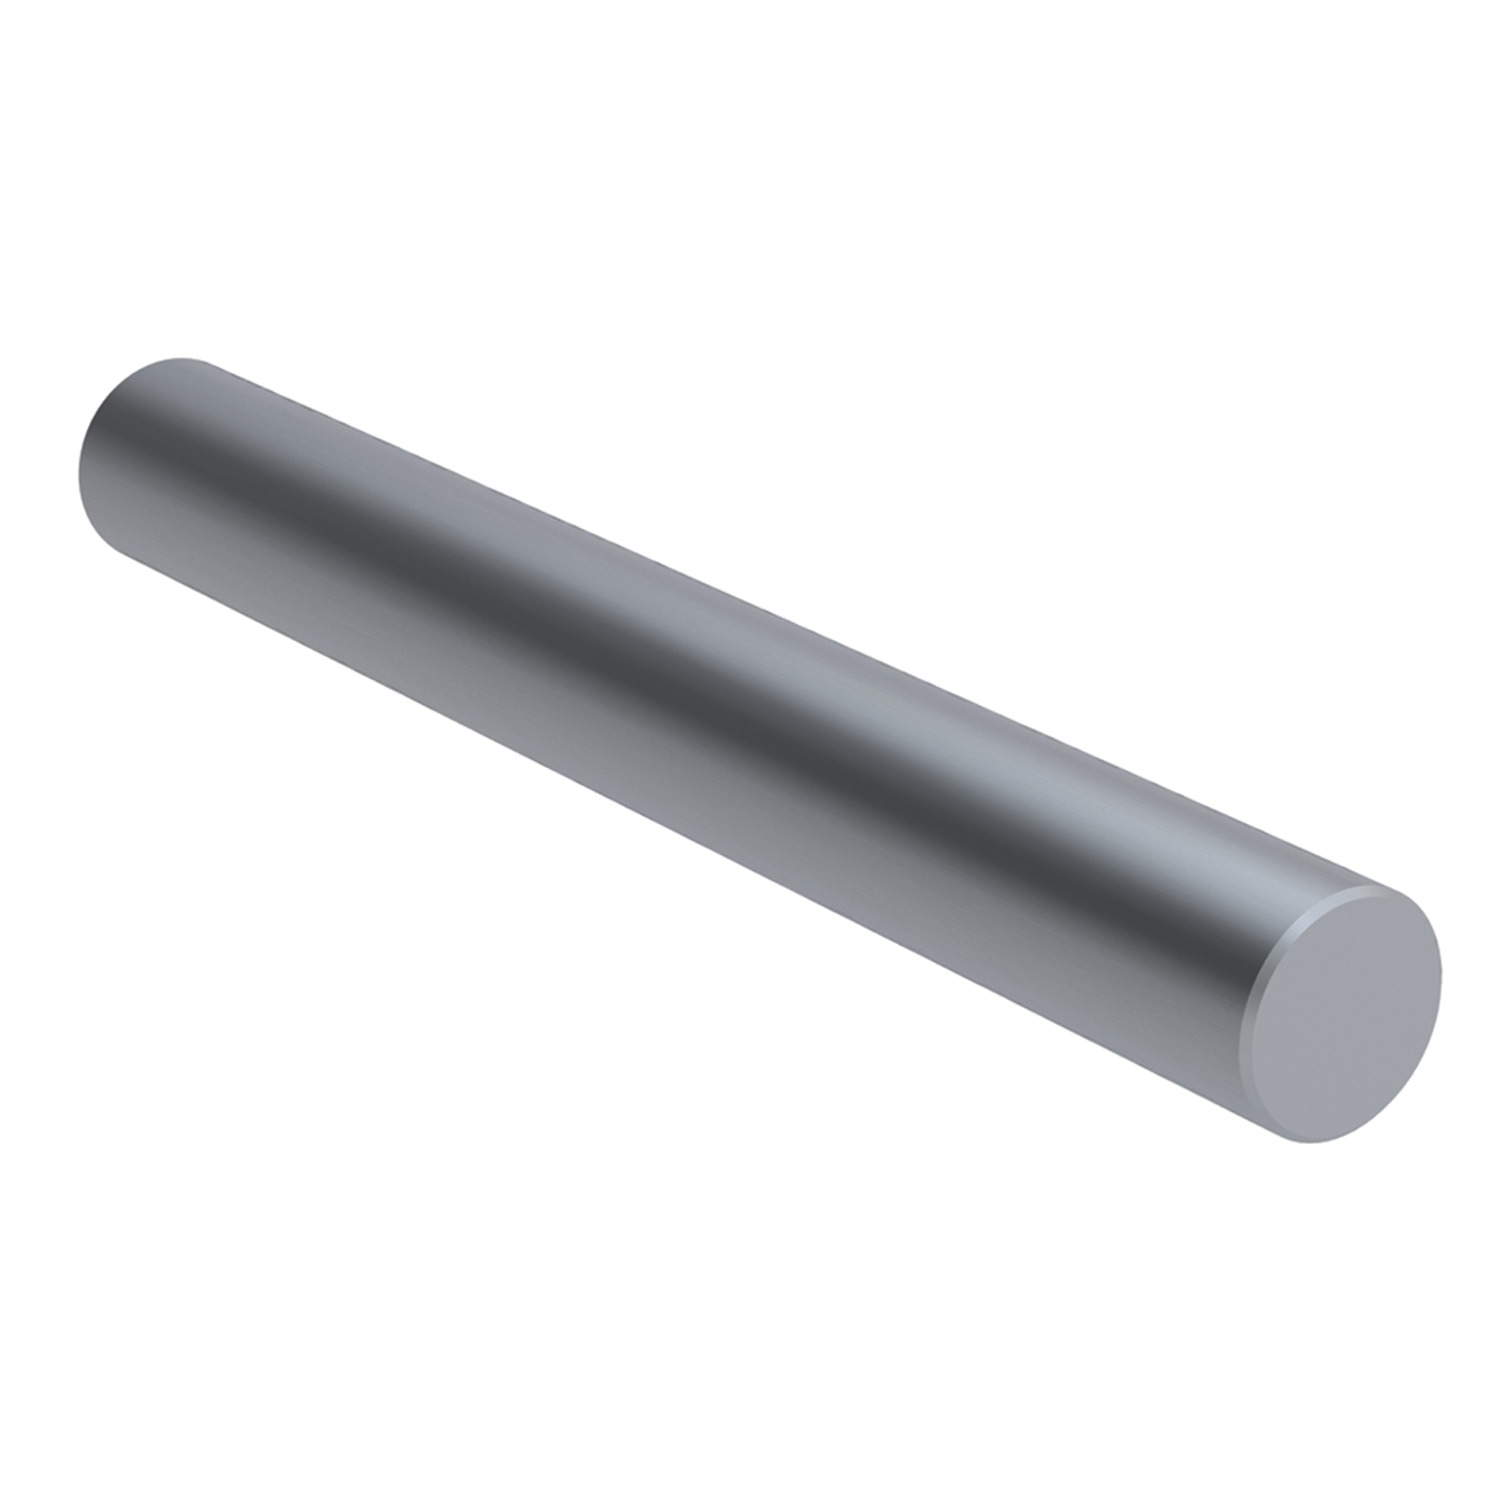 Product L1772.20, Ø20 Hardened Stainless Shafts for linear bearings / 